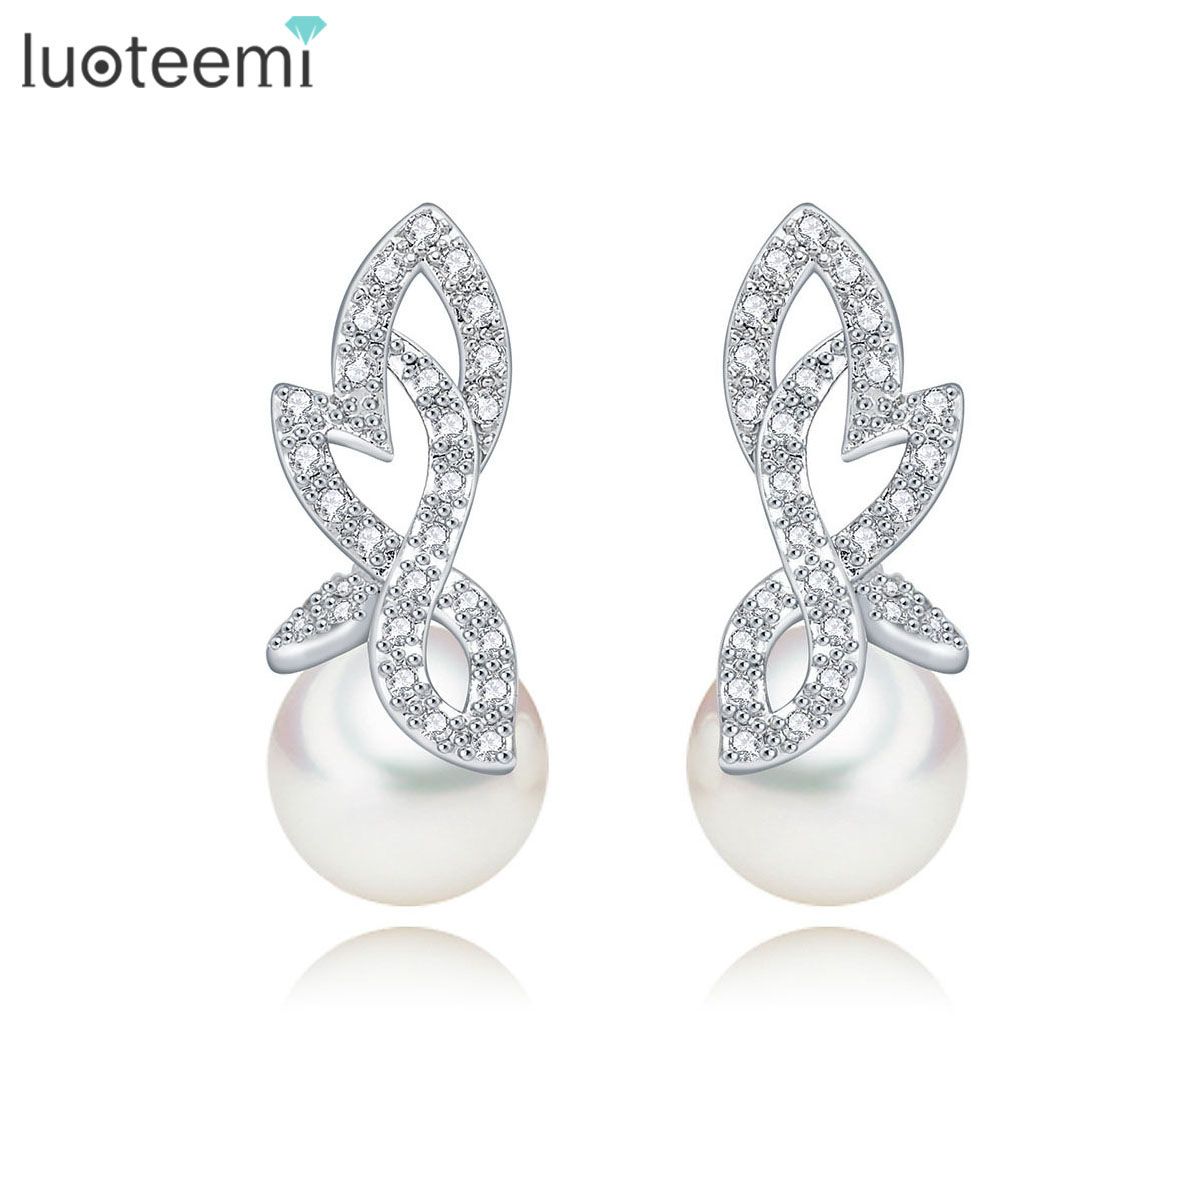 LUOTEEMI New Vintage Cute Drop Earrings Micro Pave CZ with Imitation Pearl Pendant Brincos for Girl Friend Christmas Gifts Earrings Pearl Brincos CZ